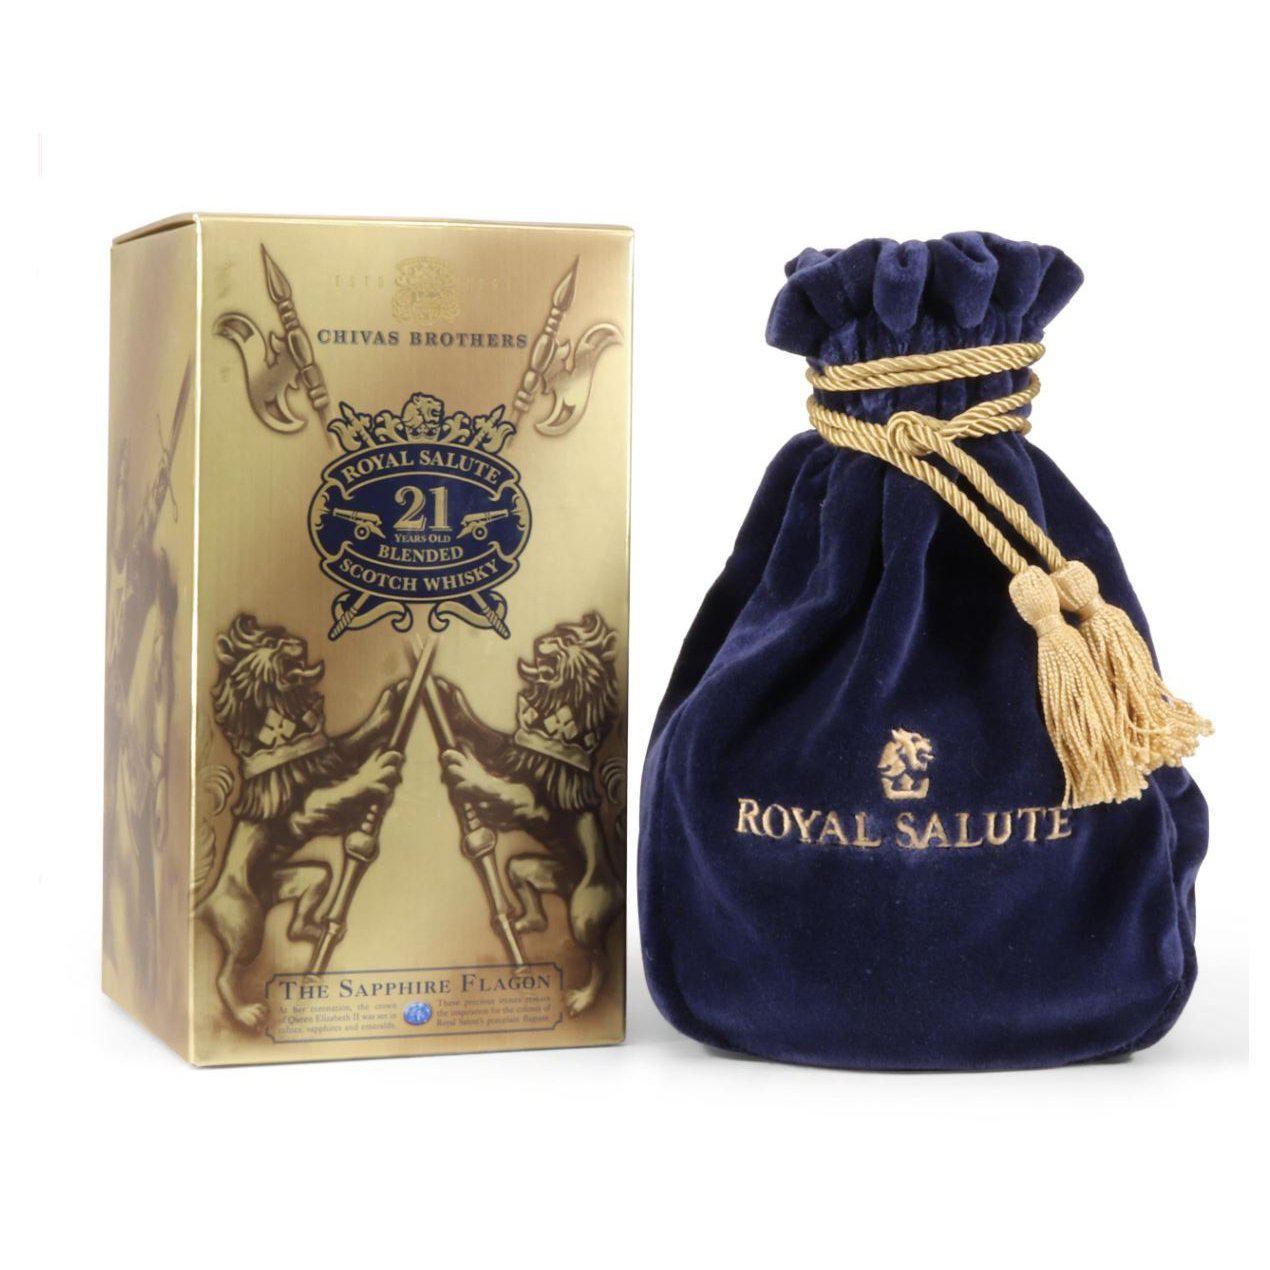 Chivas Regal Royal Salute 21 Years Old (Sapphire Flagon) 1L Limited Edition